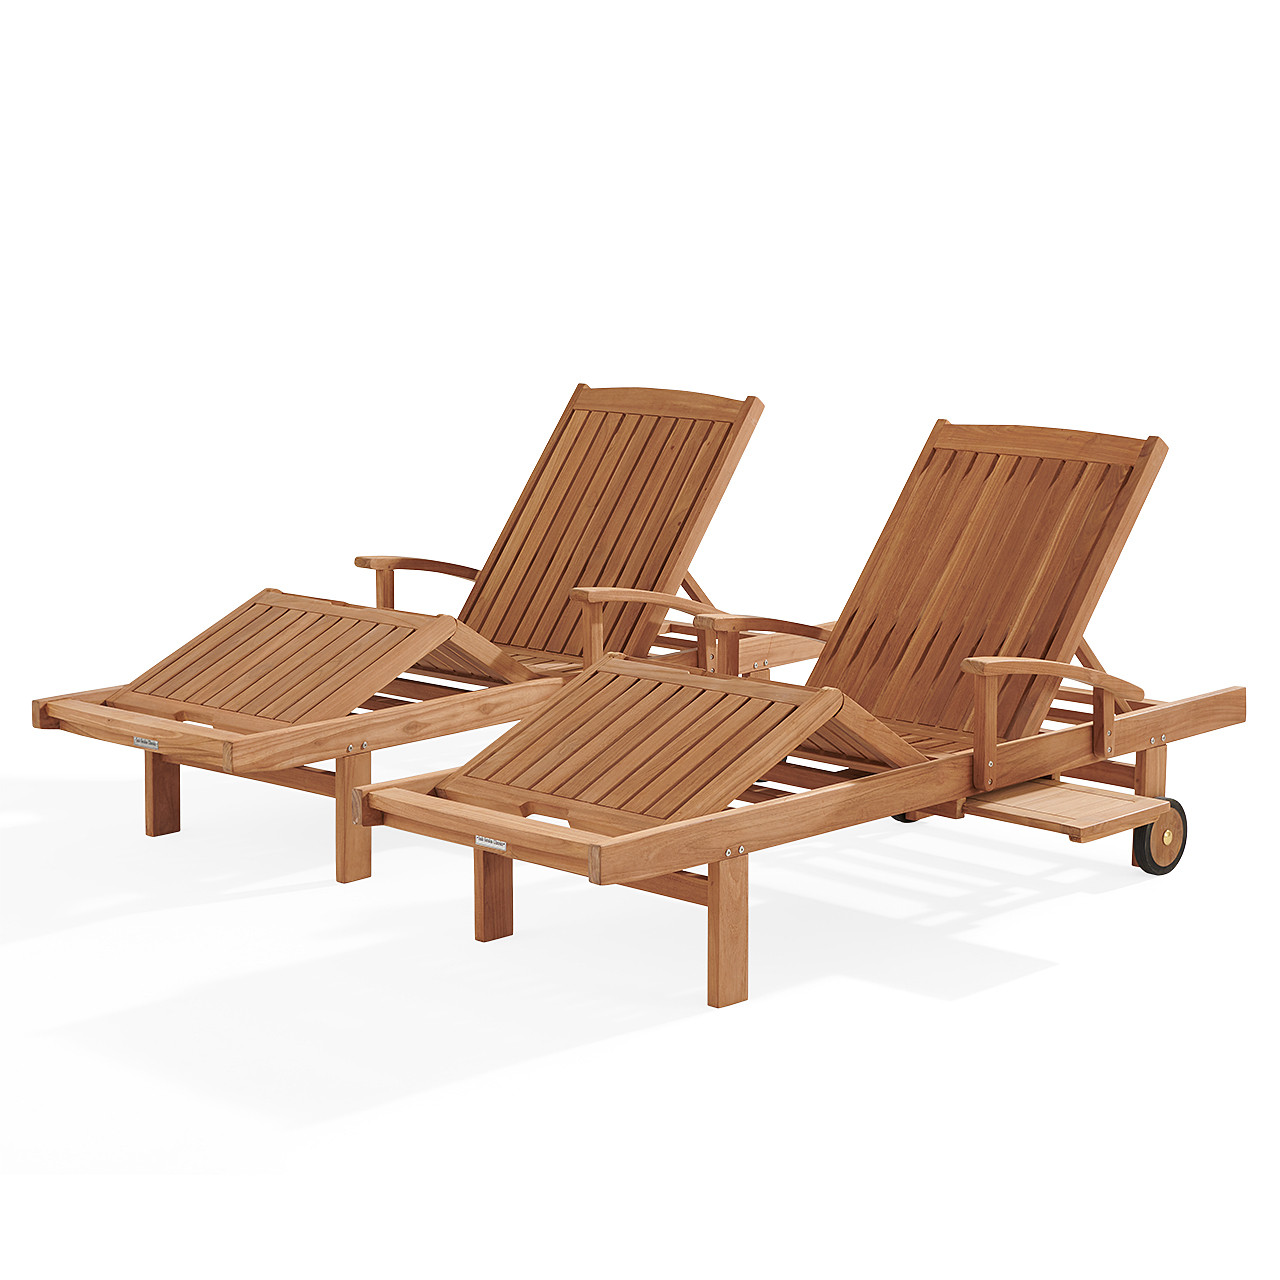 Eastchester Natural Stain Solid Teak With Cushions 2 Piece Chaise Lounge Set